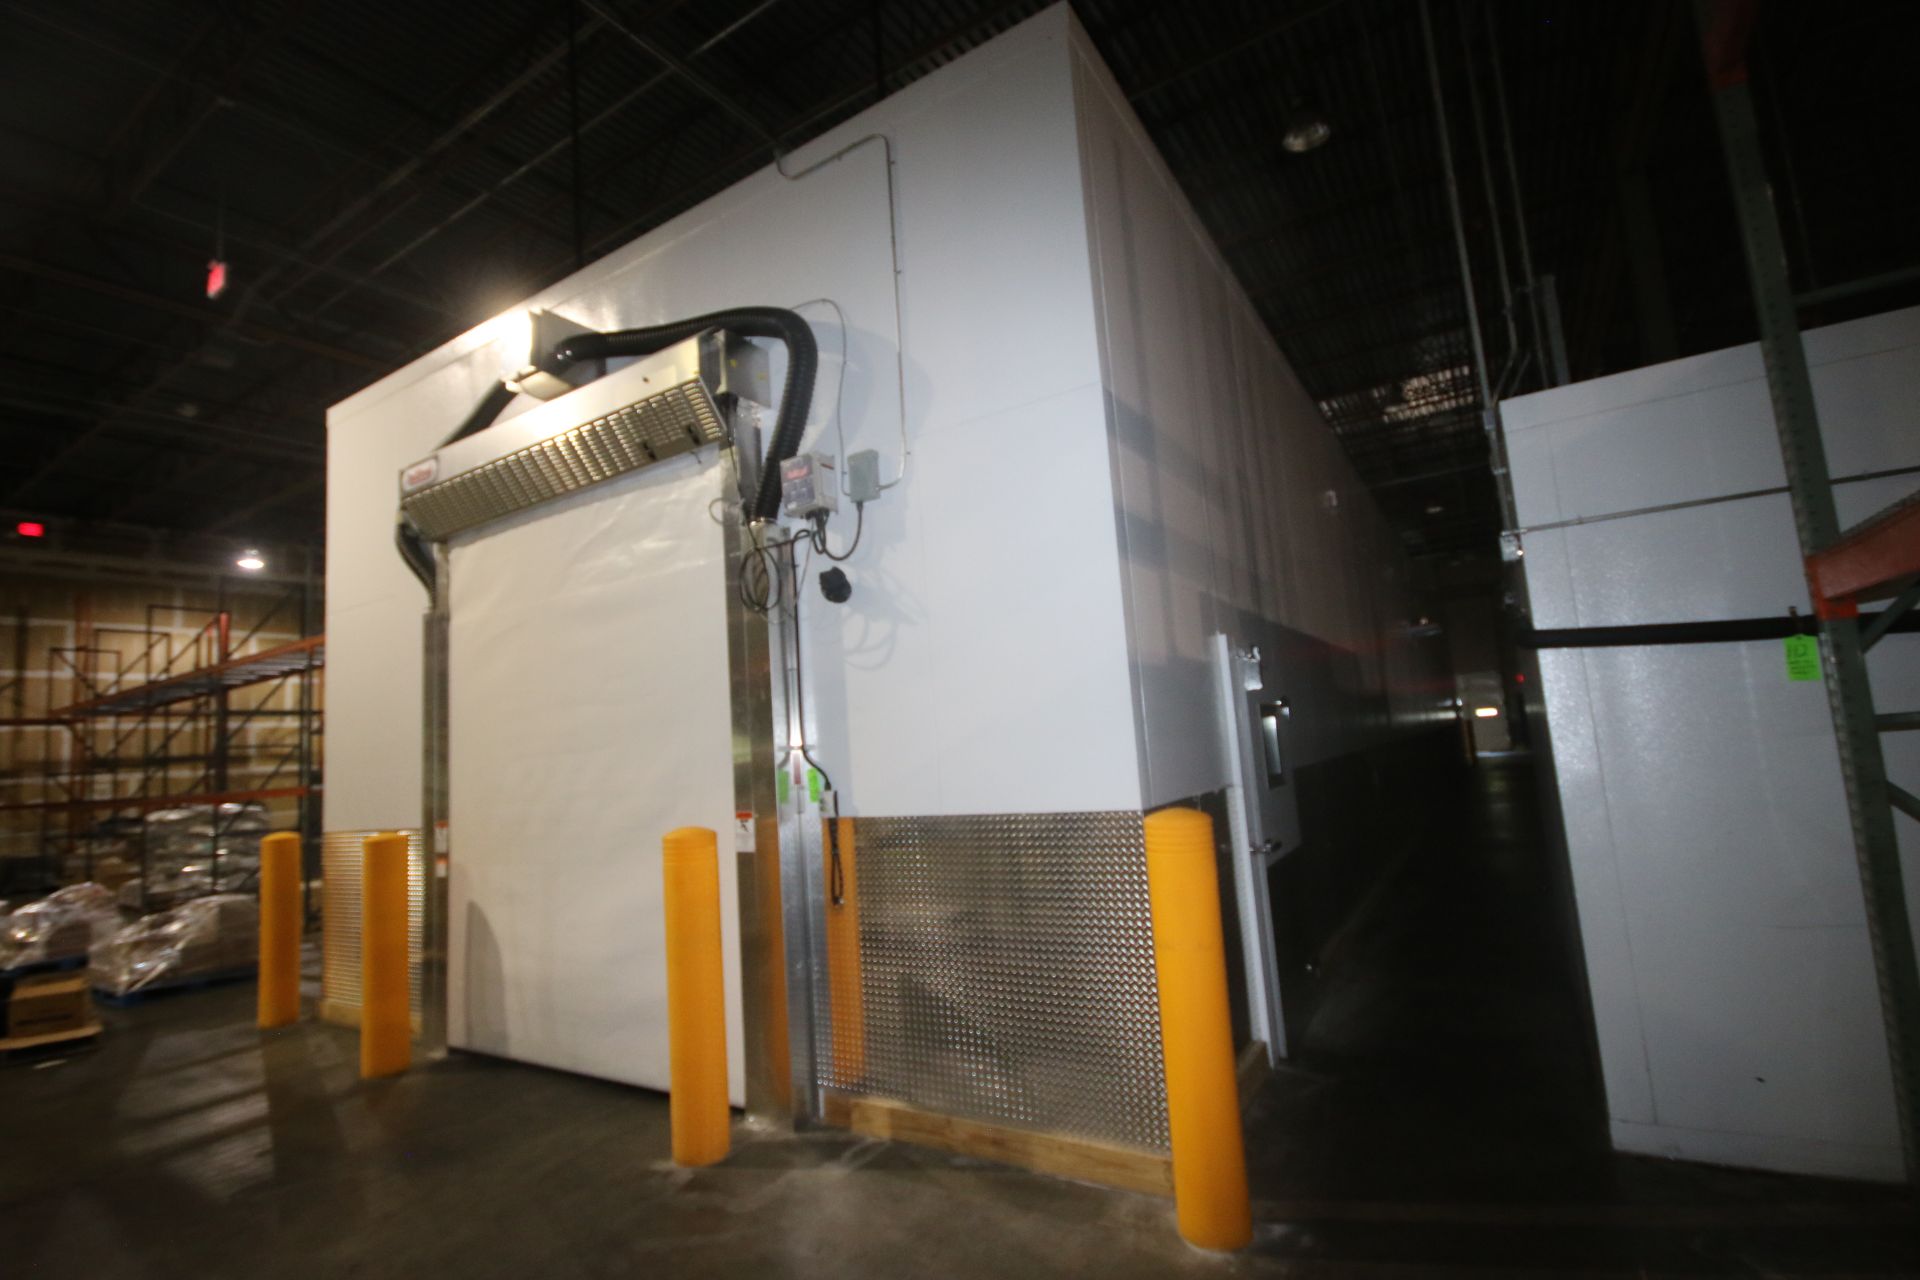 2018 RollSeal Air Tight Drive-Thru Modular Room, Overall Dims.: Aprox. 88' L x 20' W x 190" Tall, - Image 20 of 24